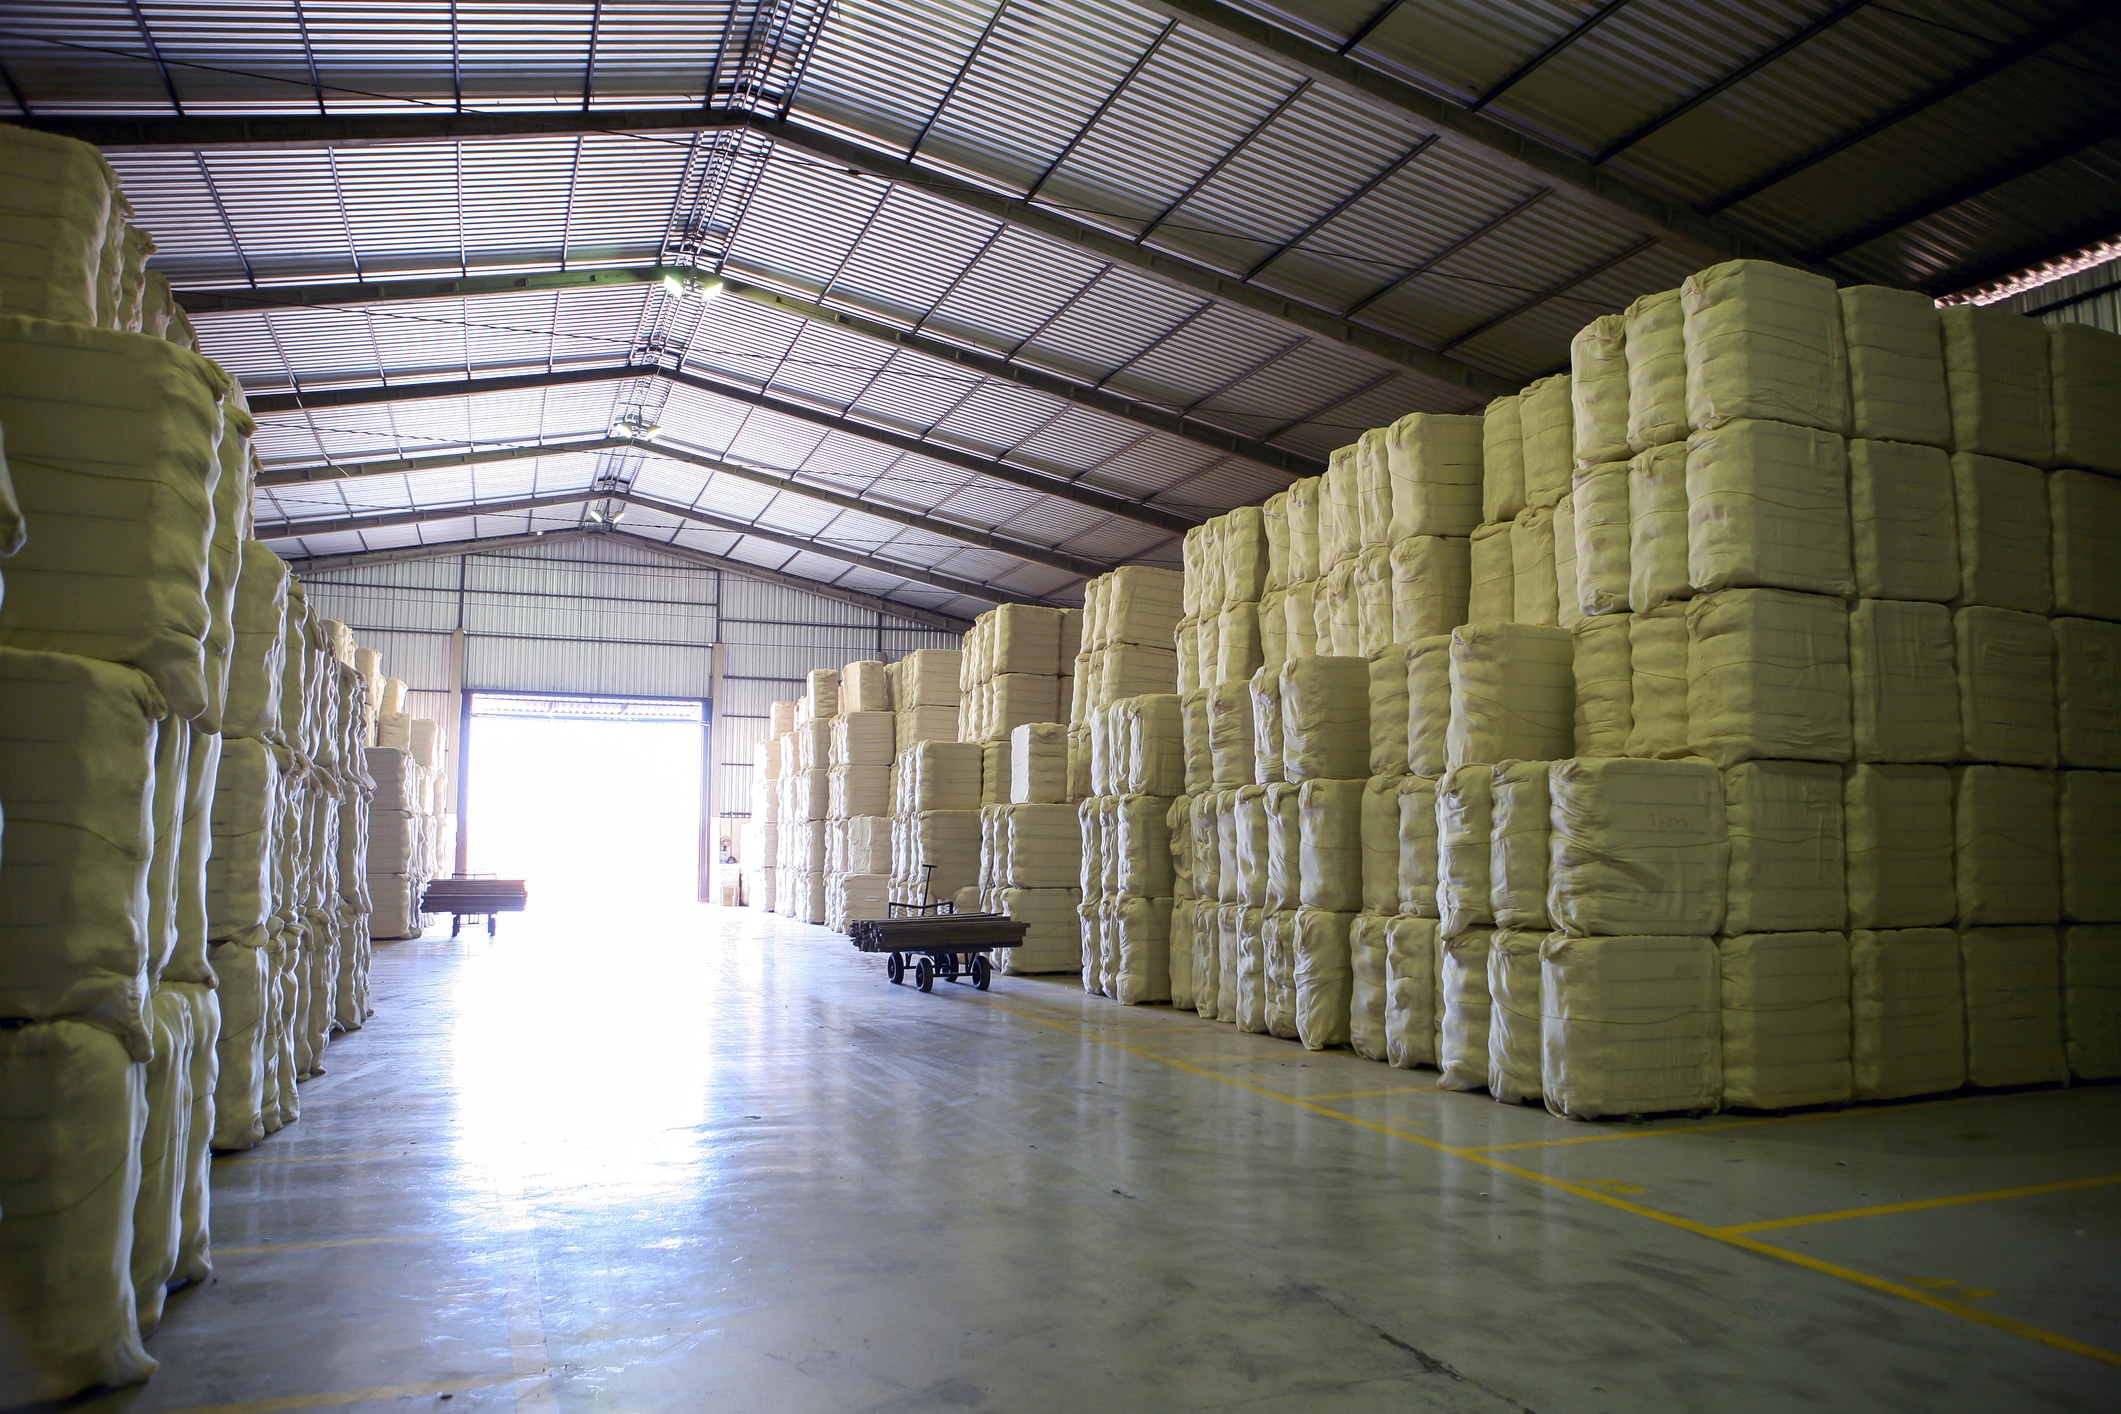 The inside of a large storage facility with hundreds of stacked bales of hemp fiber.